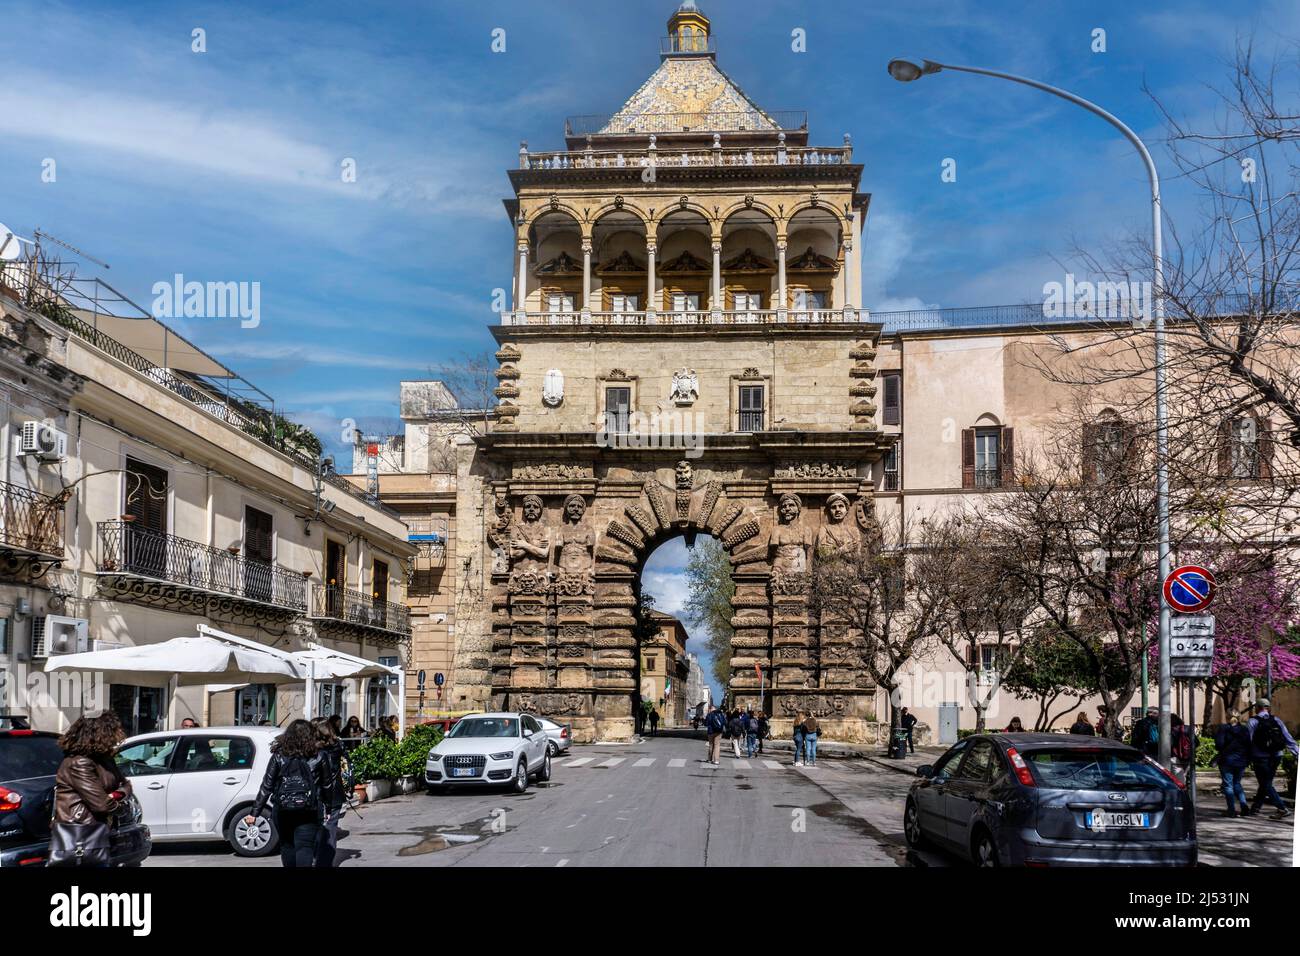 The entrance gate to the Royal Palace in Palermo, Sicily, Italy. Stock Photo